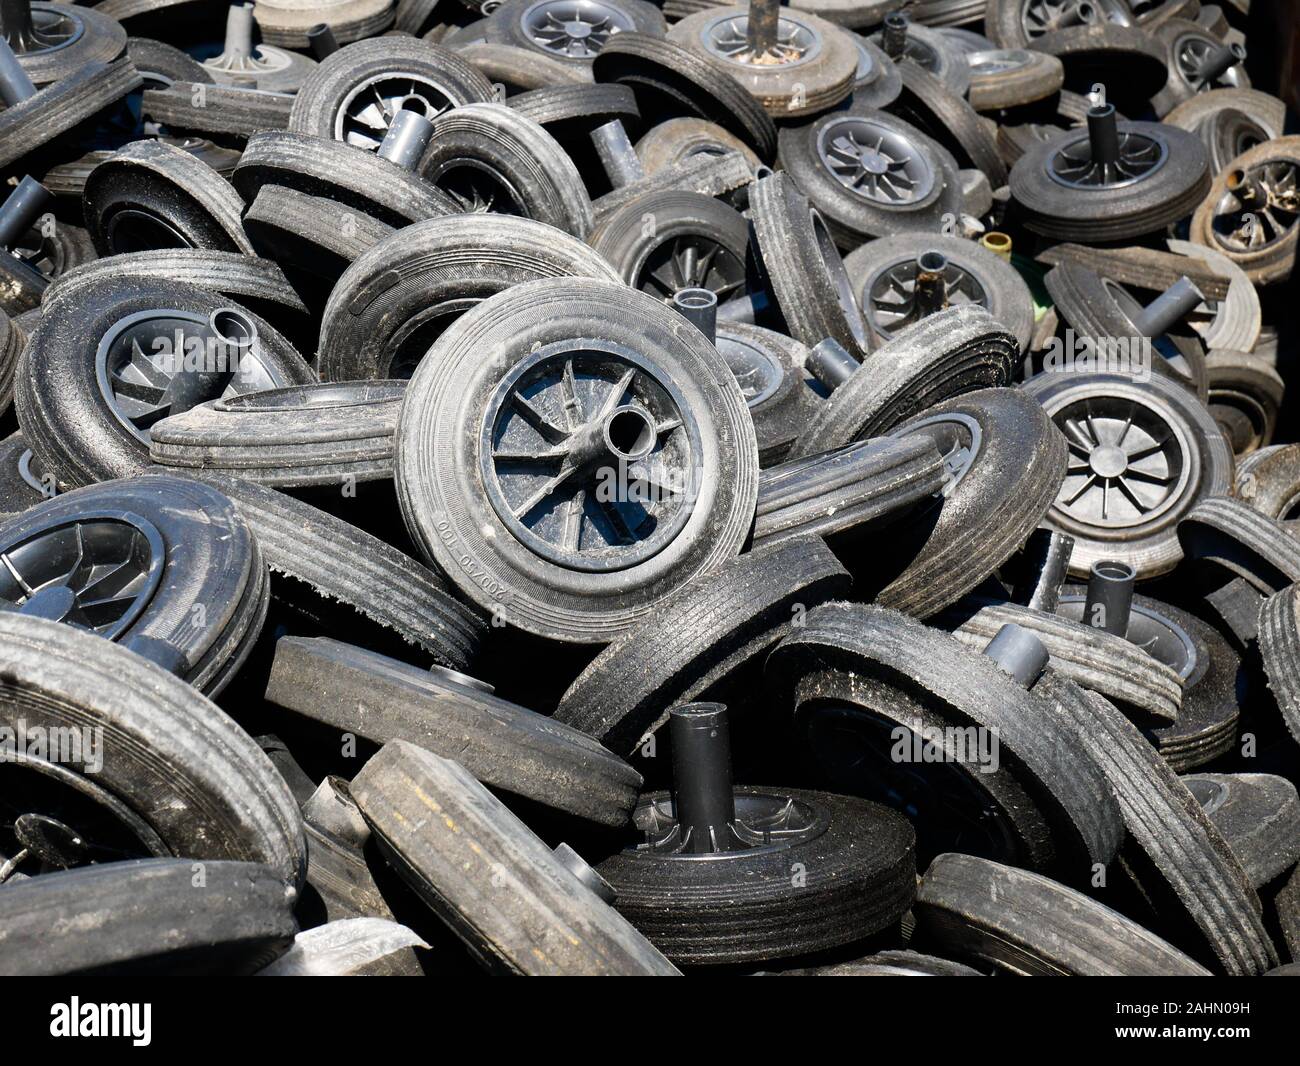 Wien/Austria - june 4 2019: close up of a group of replaced plastic wheels of waste containers for the waste management system of the city Stock Photo